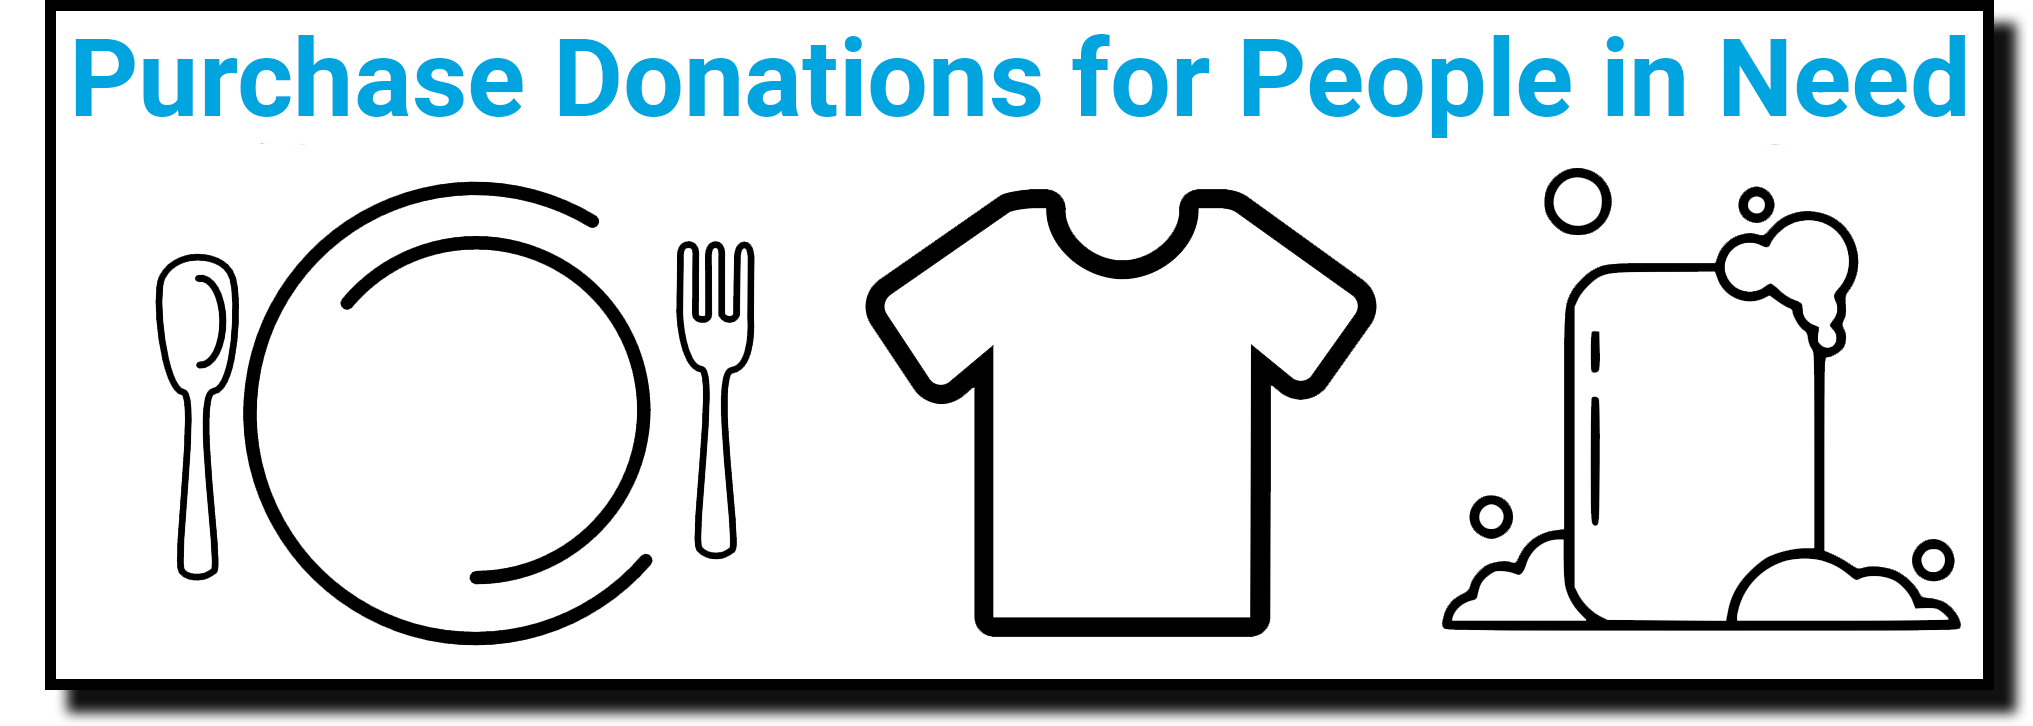 Food, Clothing, Hygiene Products